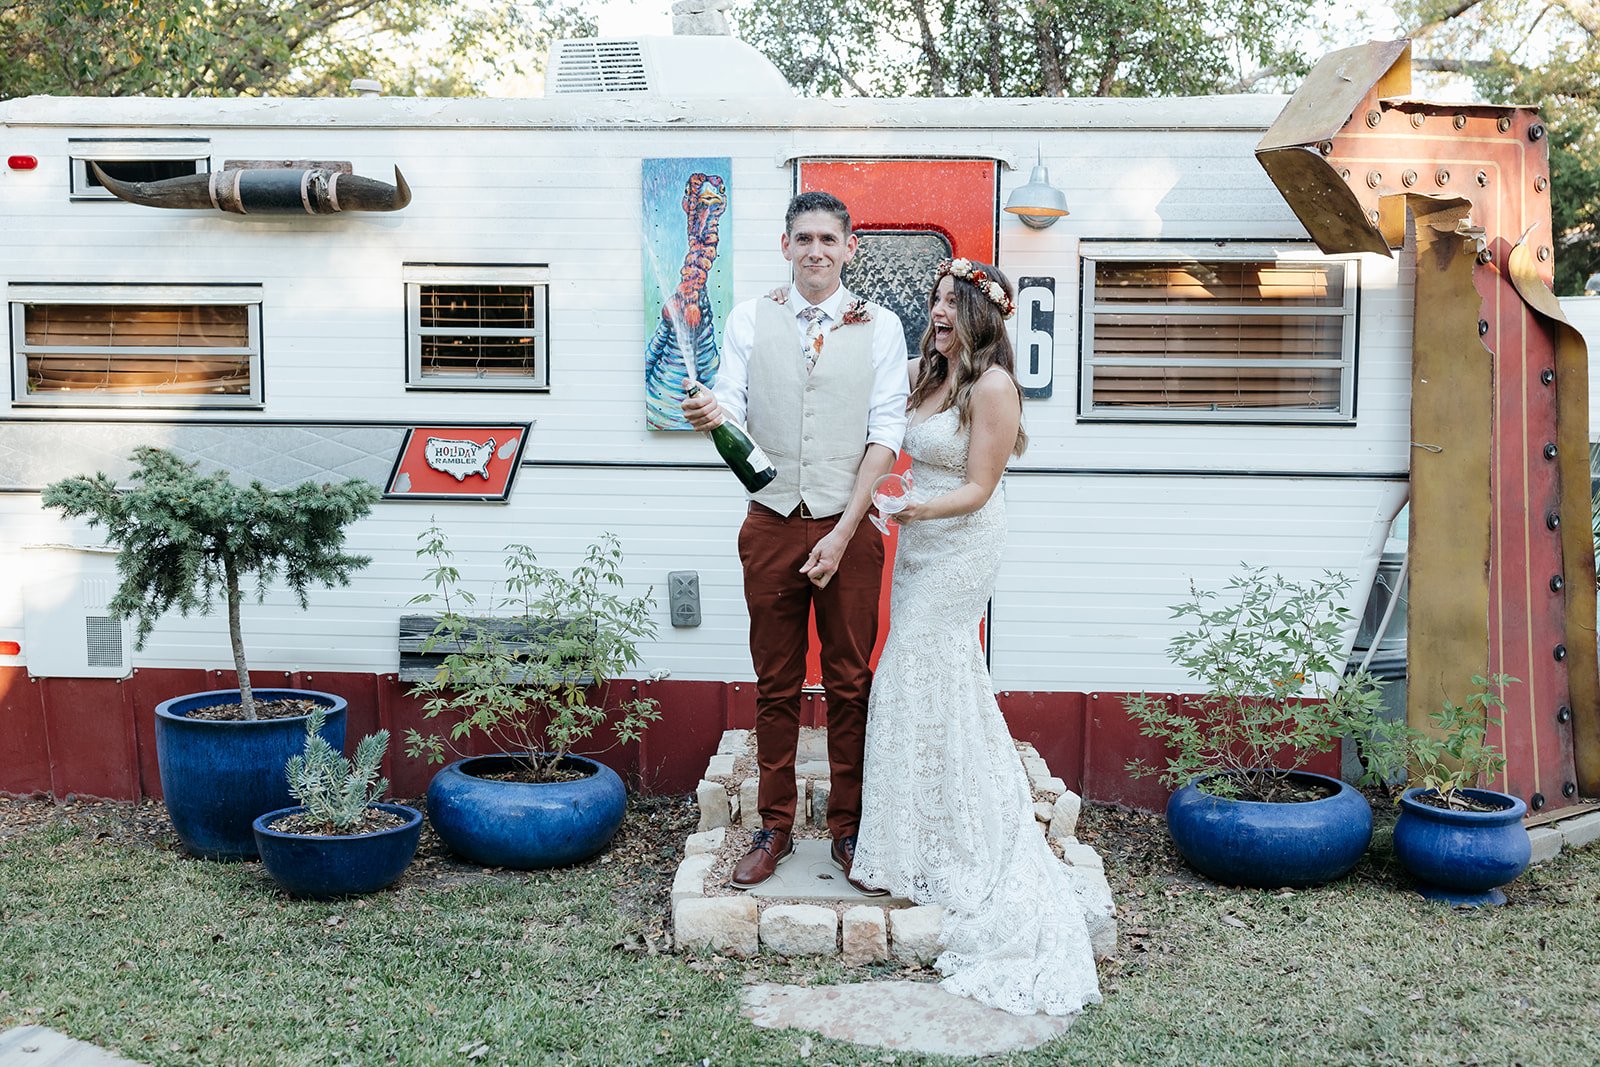 The couple popping champagne in front of the vintage remodeled camper trailers